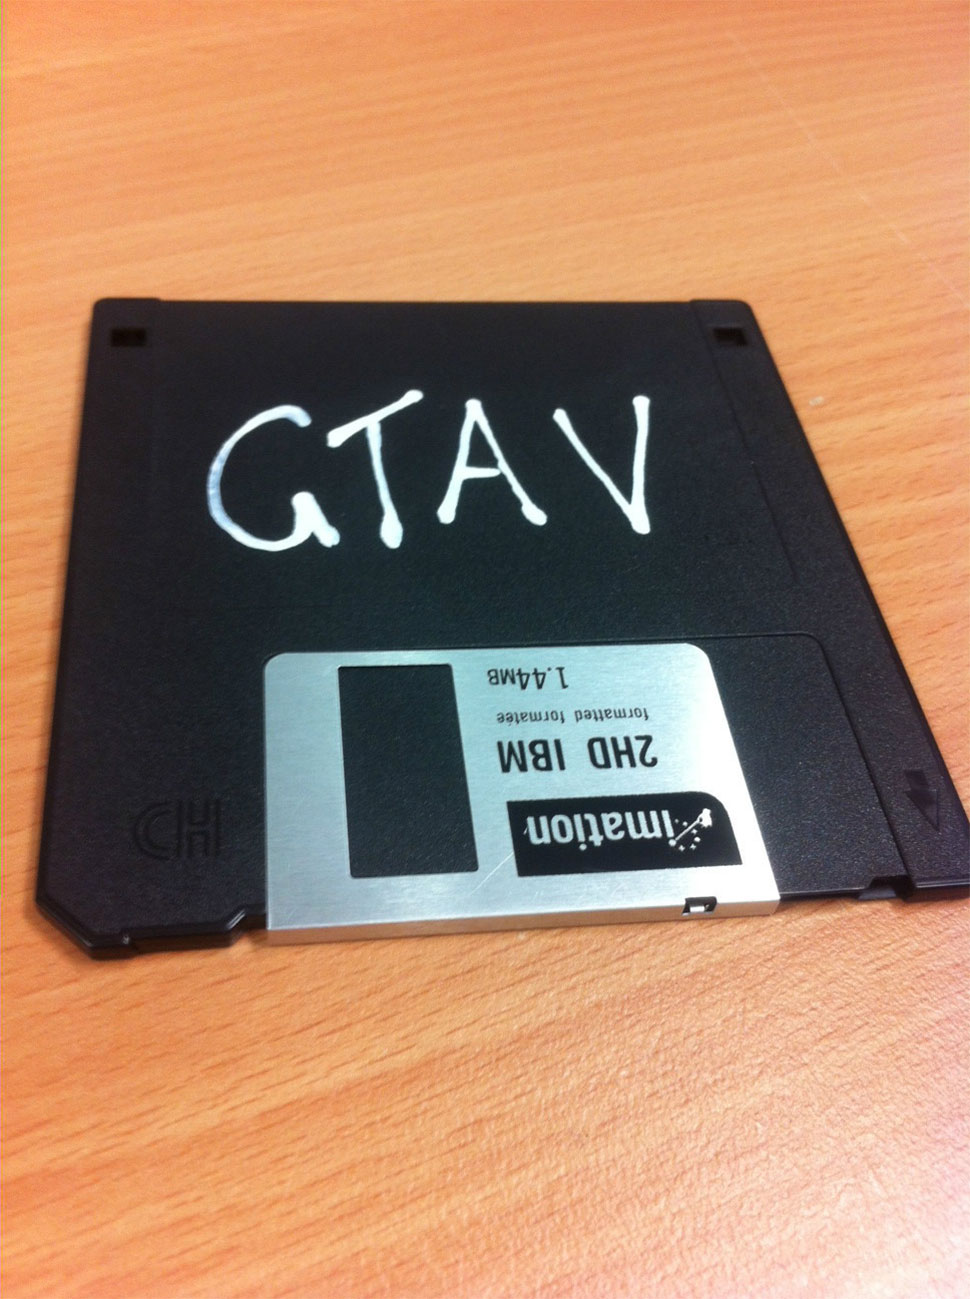 A Very Floppy PC Version Of Grand Theft Auto V Is For Sale On eBay